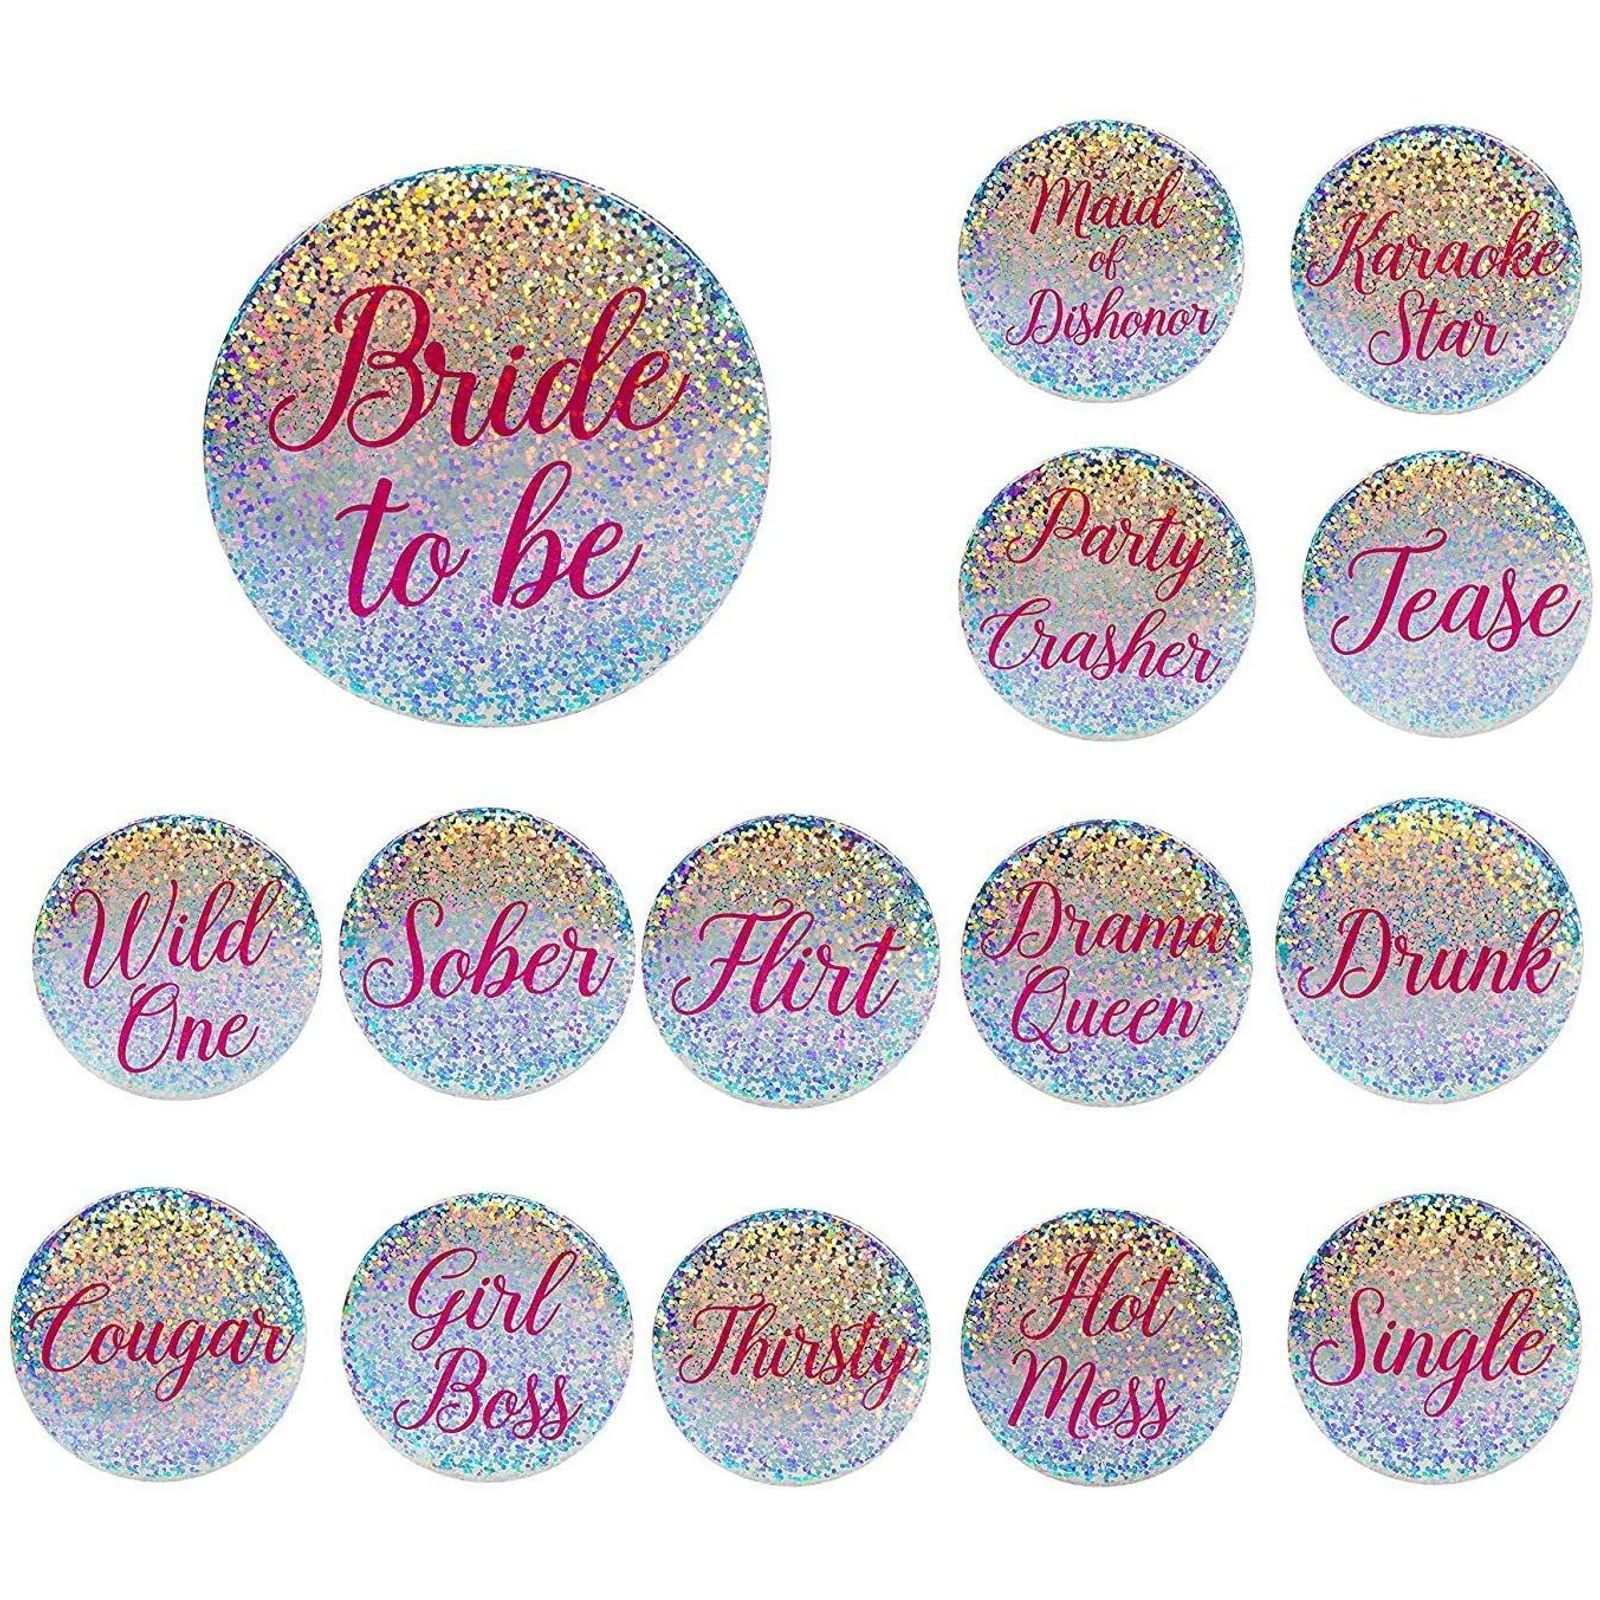 10 pcs maid of honor bridesmaids mother of bride to be flower girl wreath badge pin pinback button wedding shower bachelorette party favors 